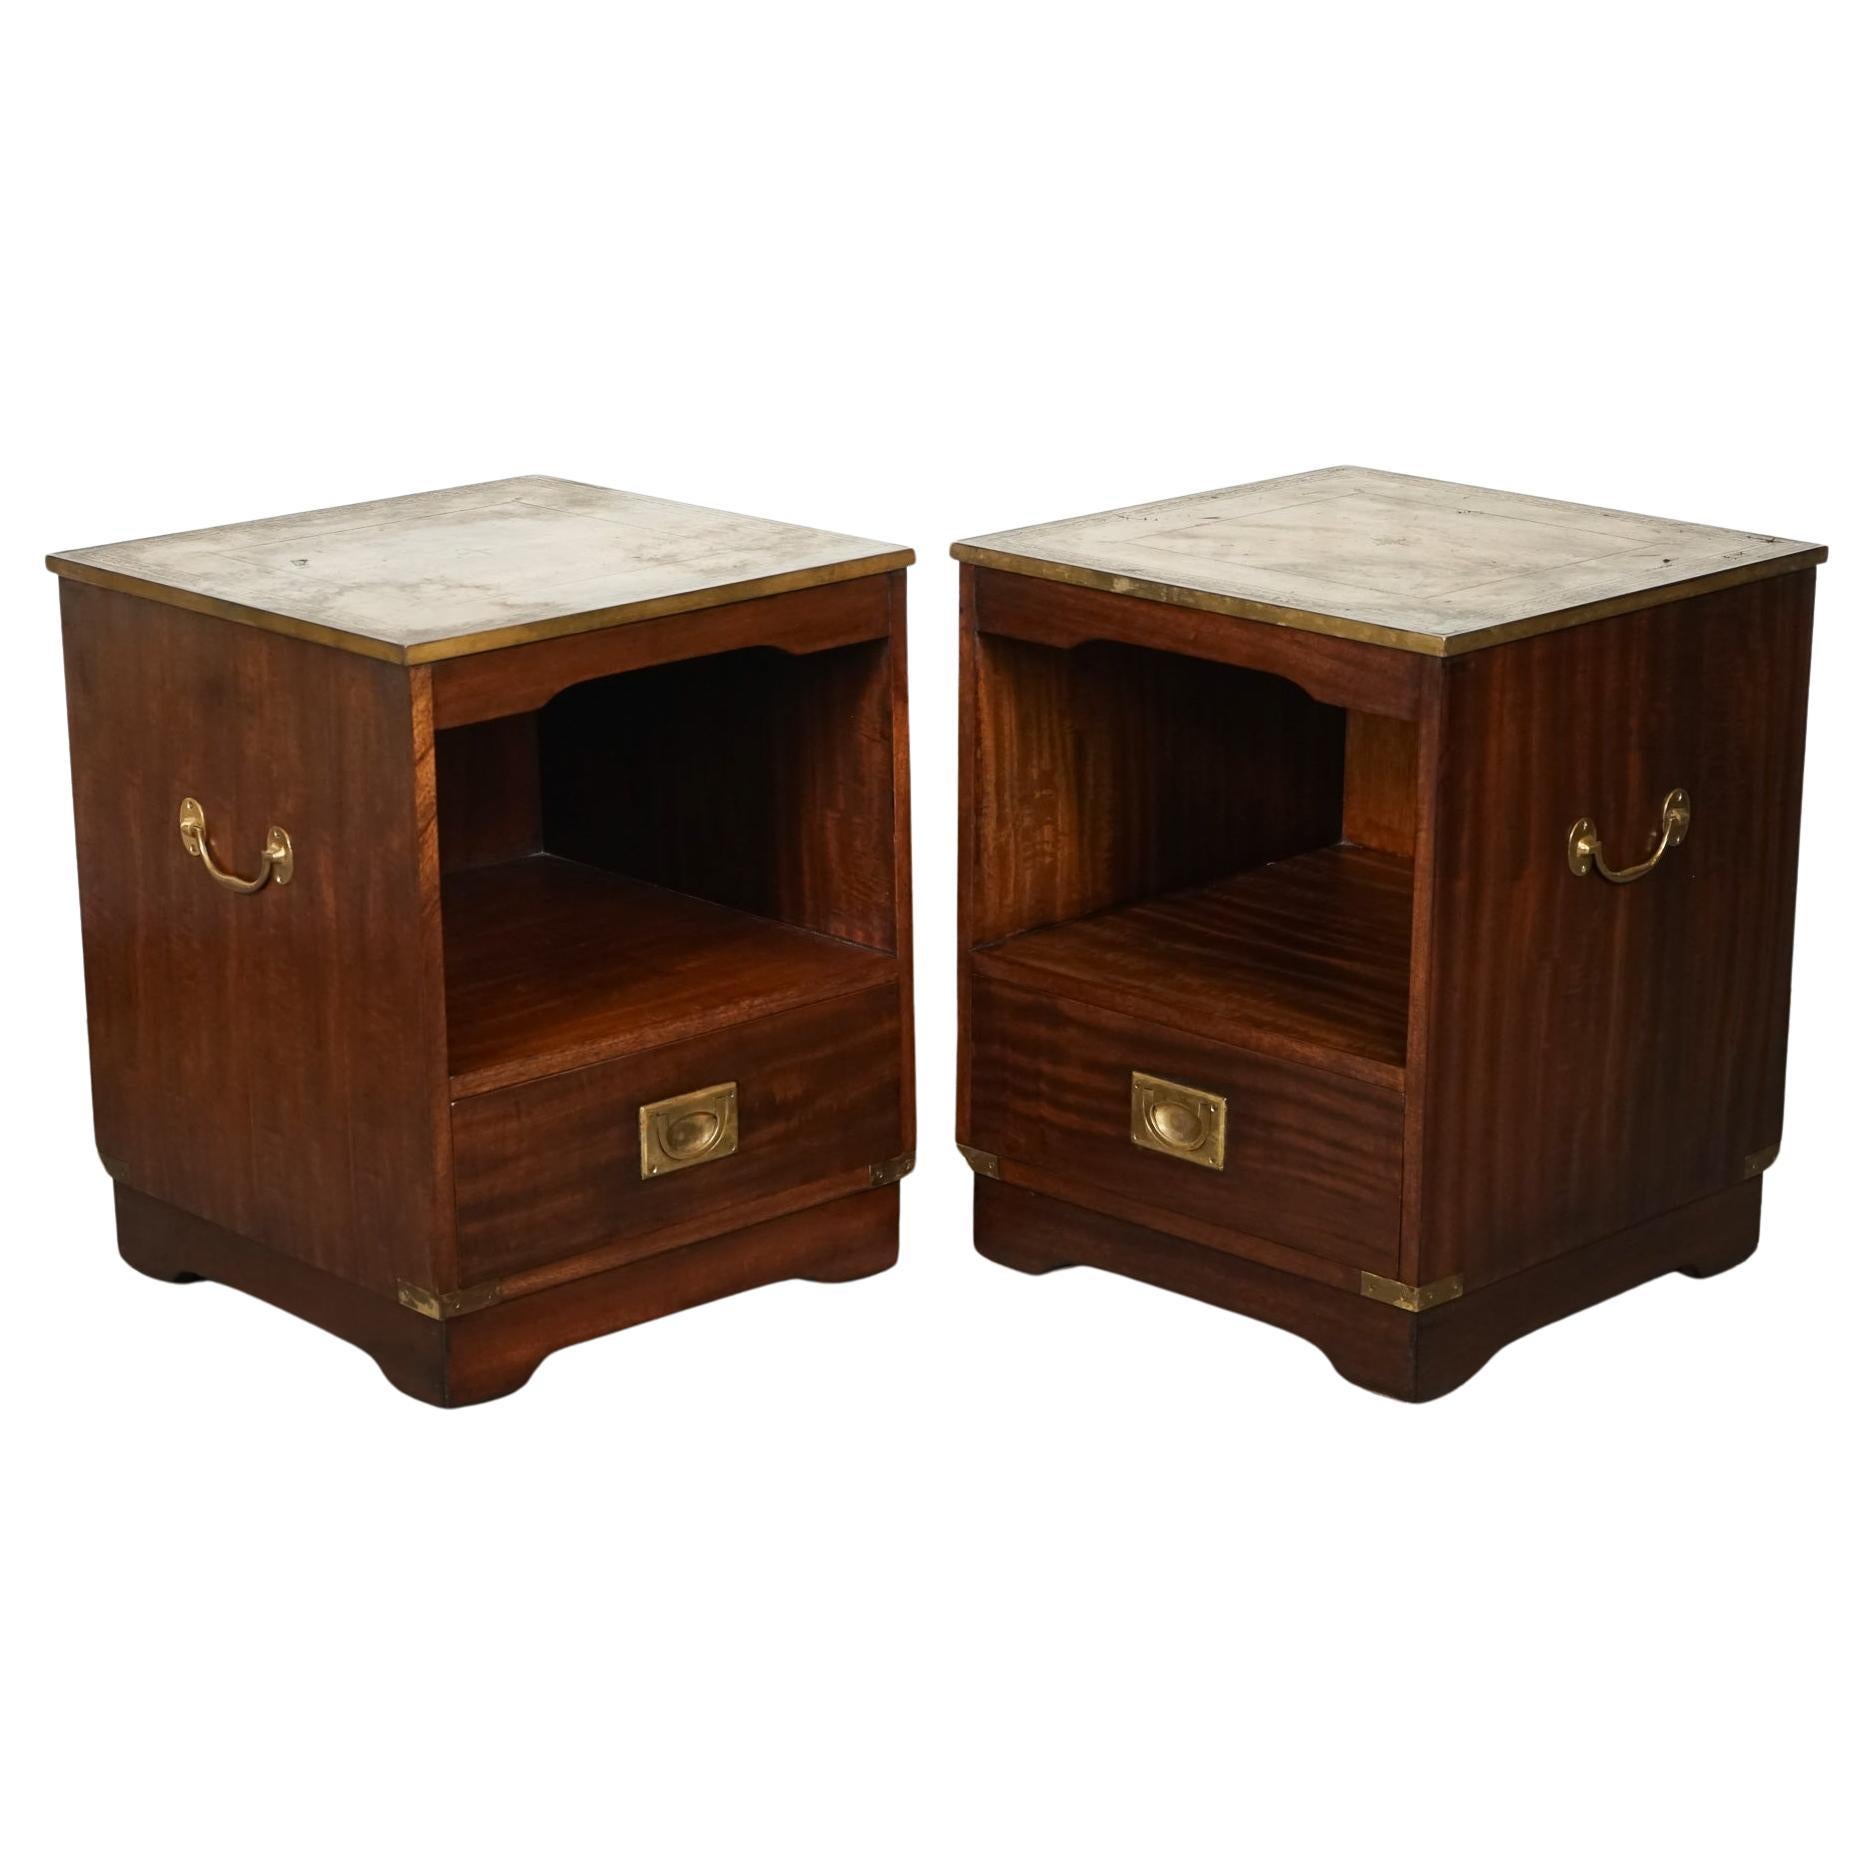 VINTAGE PAIR OF MILITARY CAMPAIGN BEDSIDE TABLES NiGHTSTANDS BROWN LEATHER TOPJ1